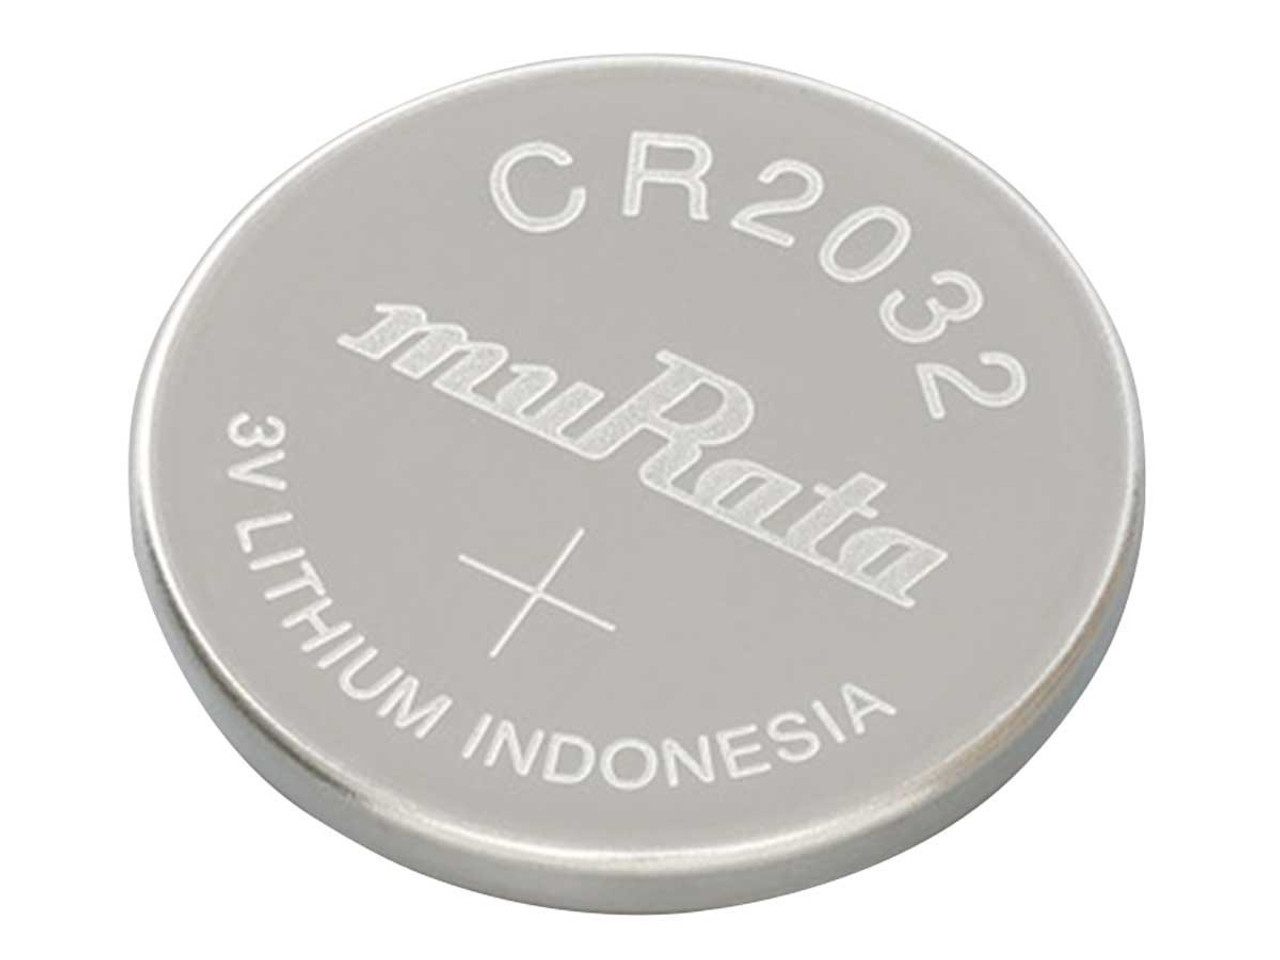 Sony Murata CR2032 3V Lithium Coin Battery - 5 Pack FREE SHIPPING